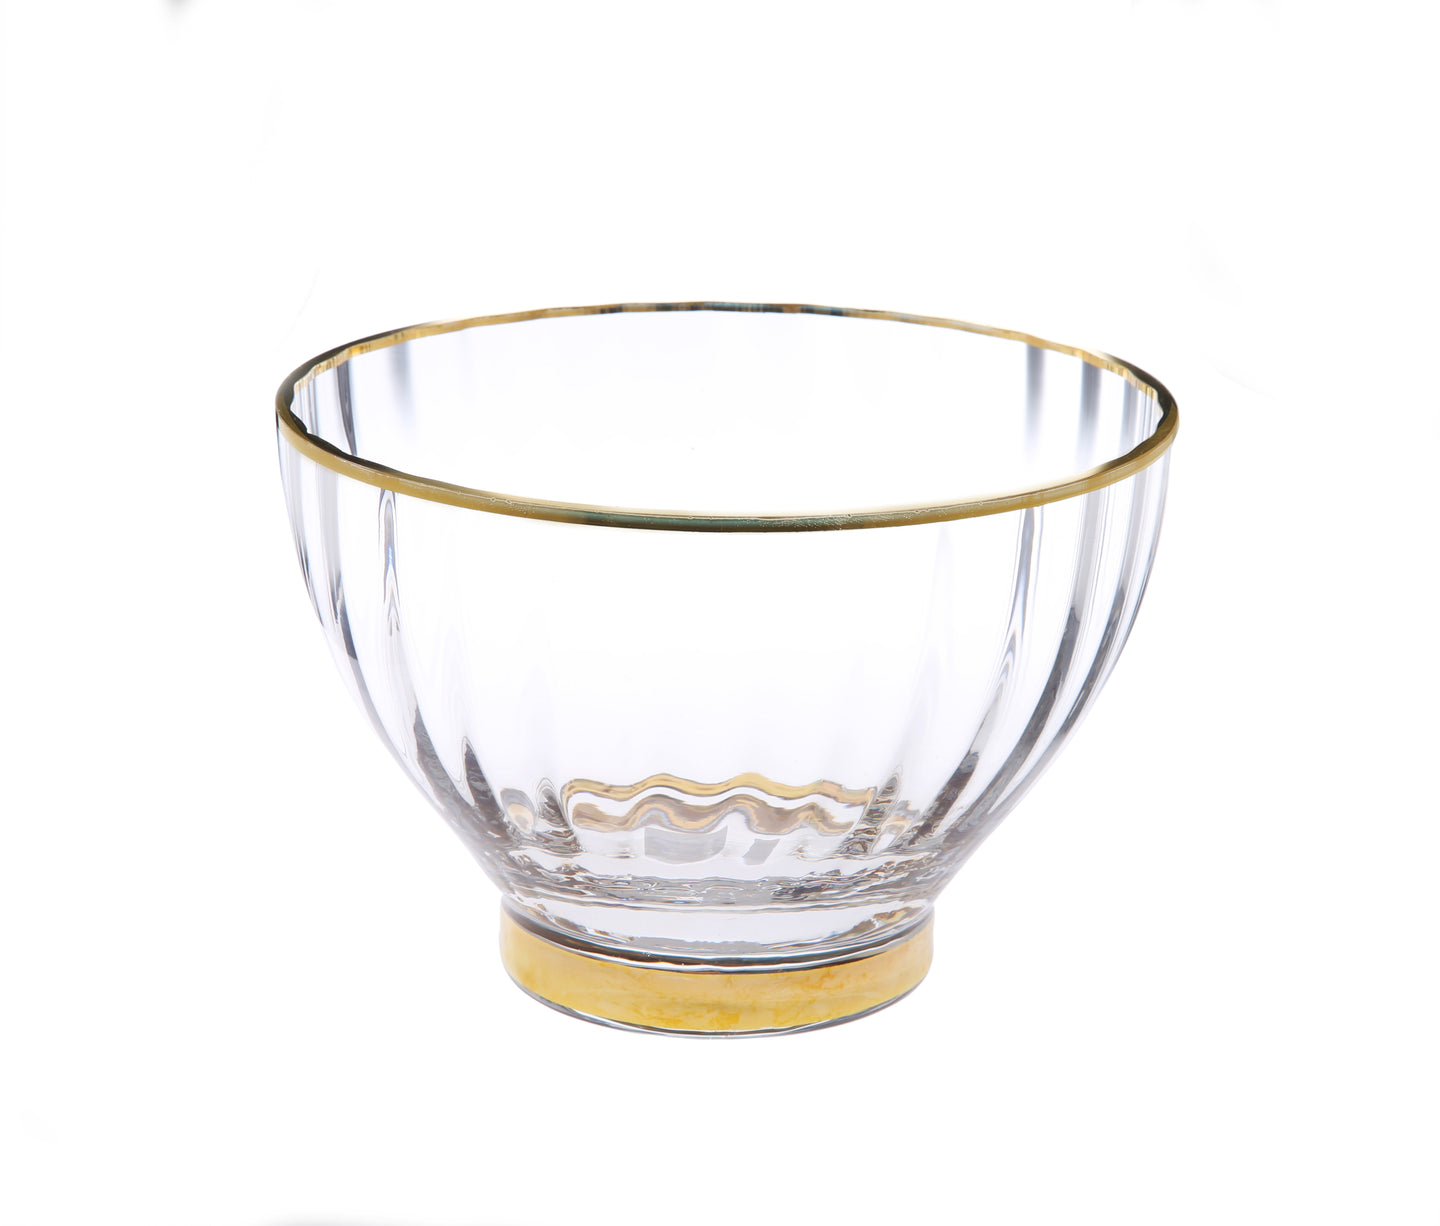 Set of 4 Line Textured  Dessert Bowls with Gold Rim and Base